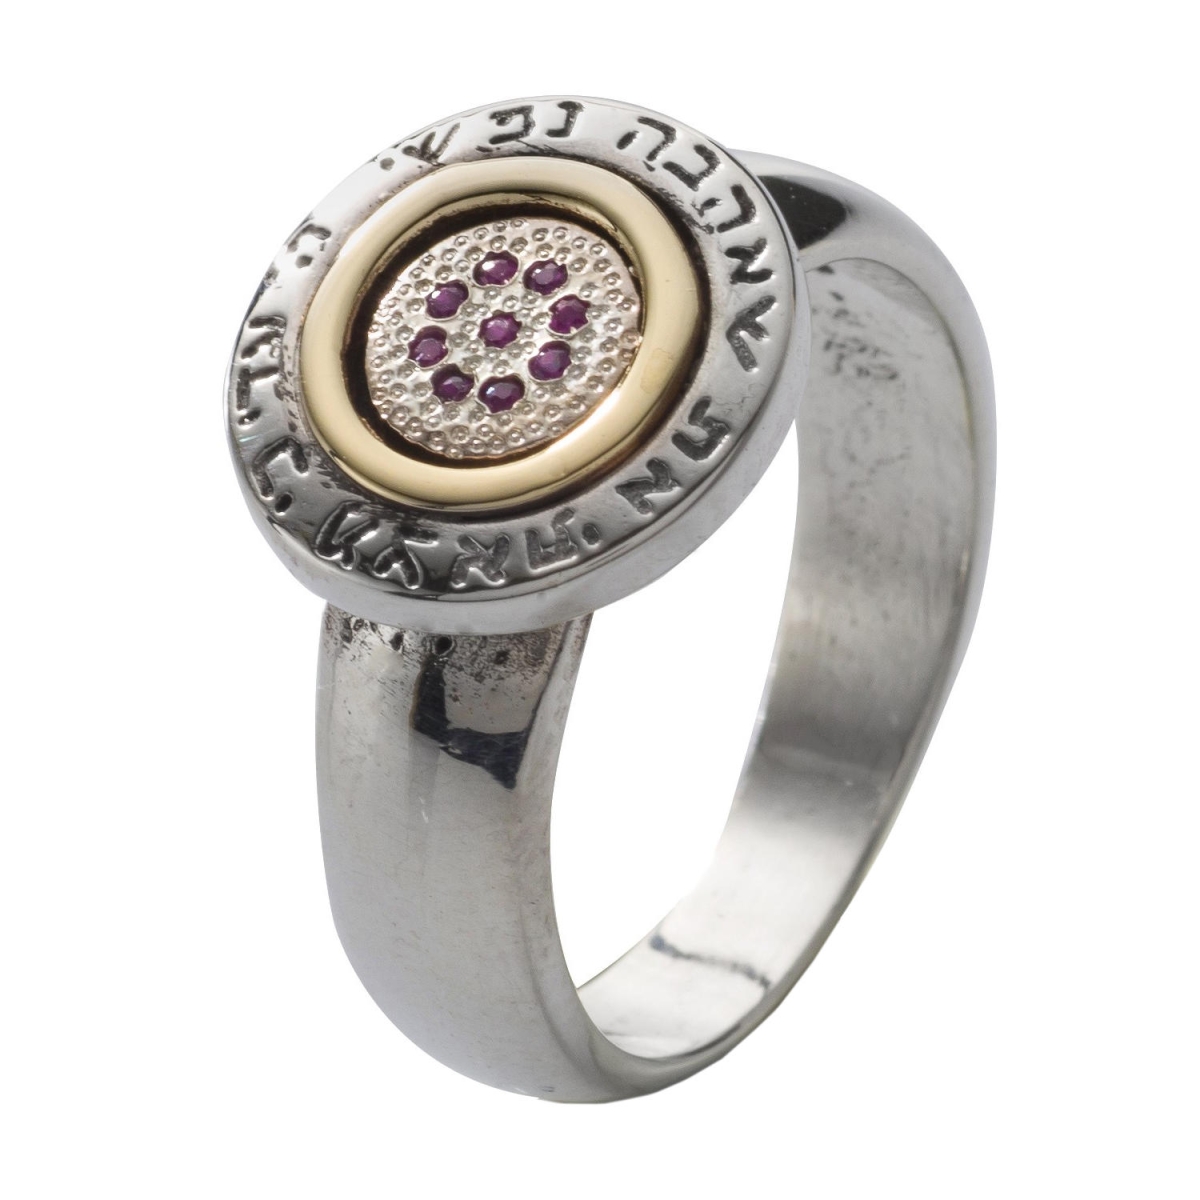 Sterling Silver and Gold Queen Esther Ring with Rubies - 1